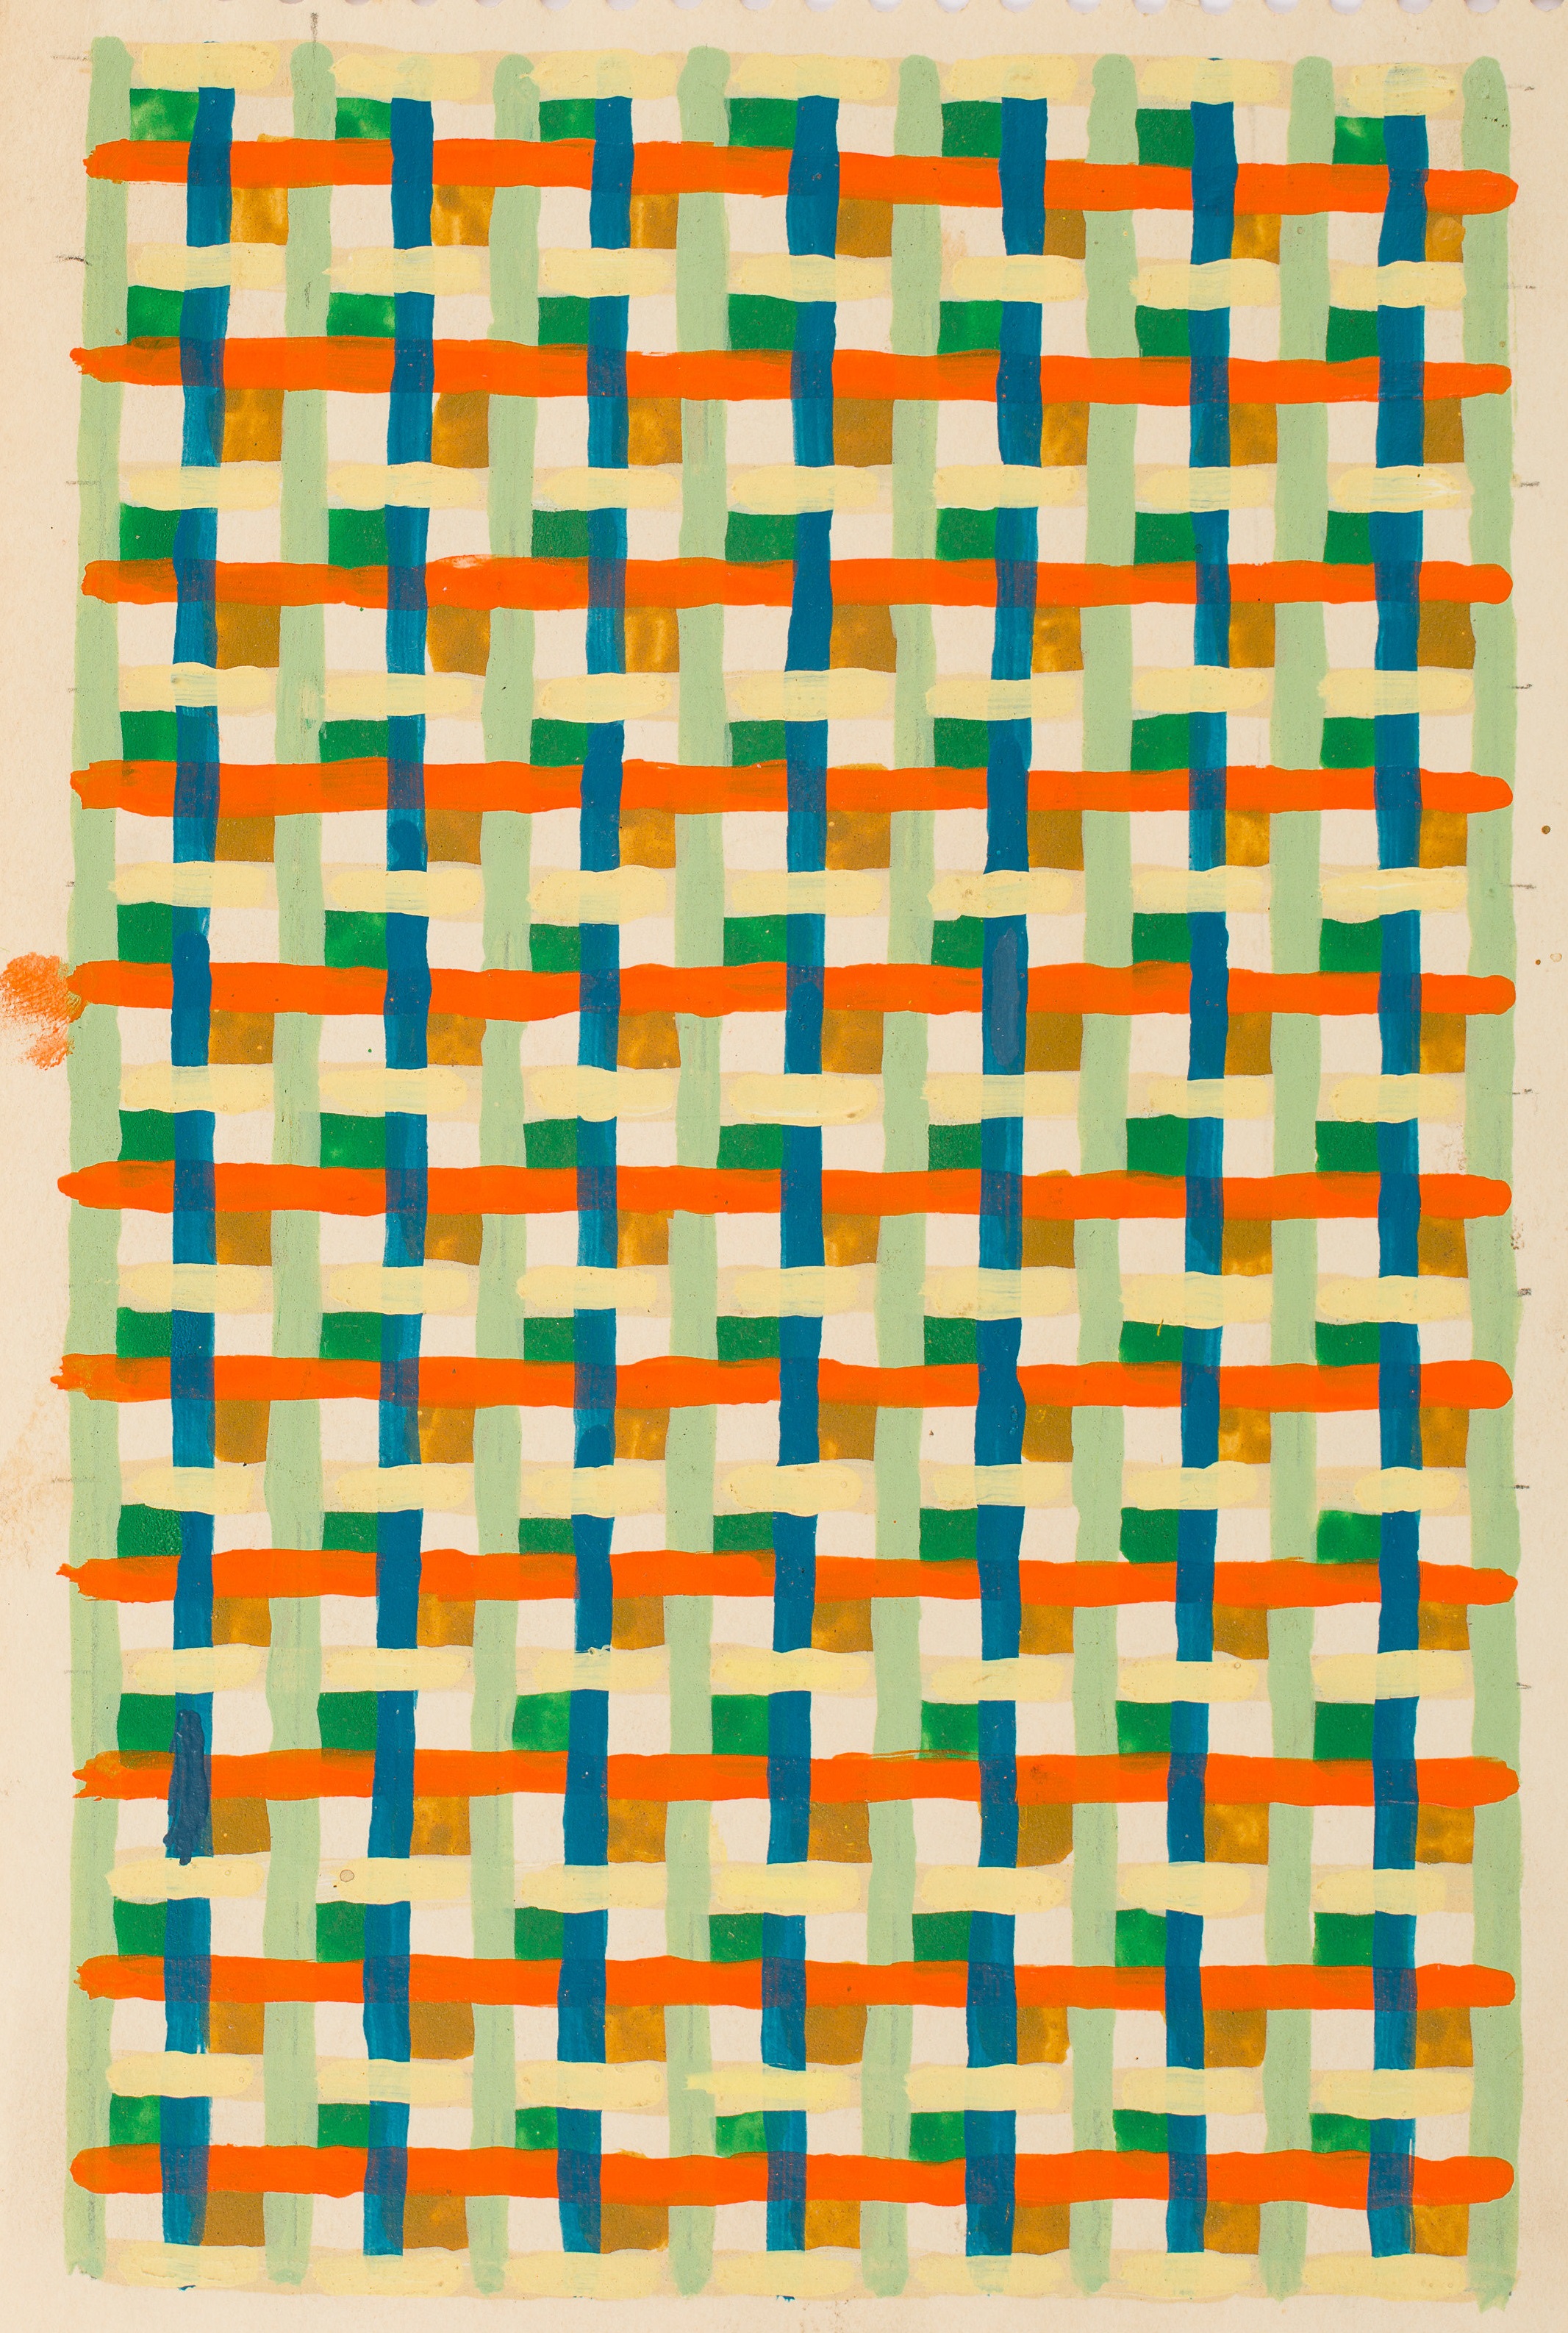  Peter Young,  Linear Weave Study,  1979, Acrylic on notebook paper, 8 3/4 x 5 3/4 inches (22.2 x 14.6 cm) 